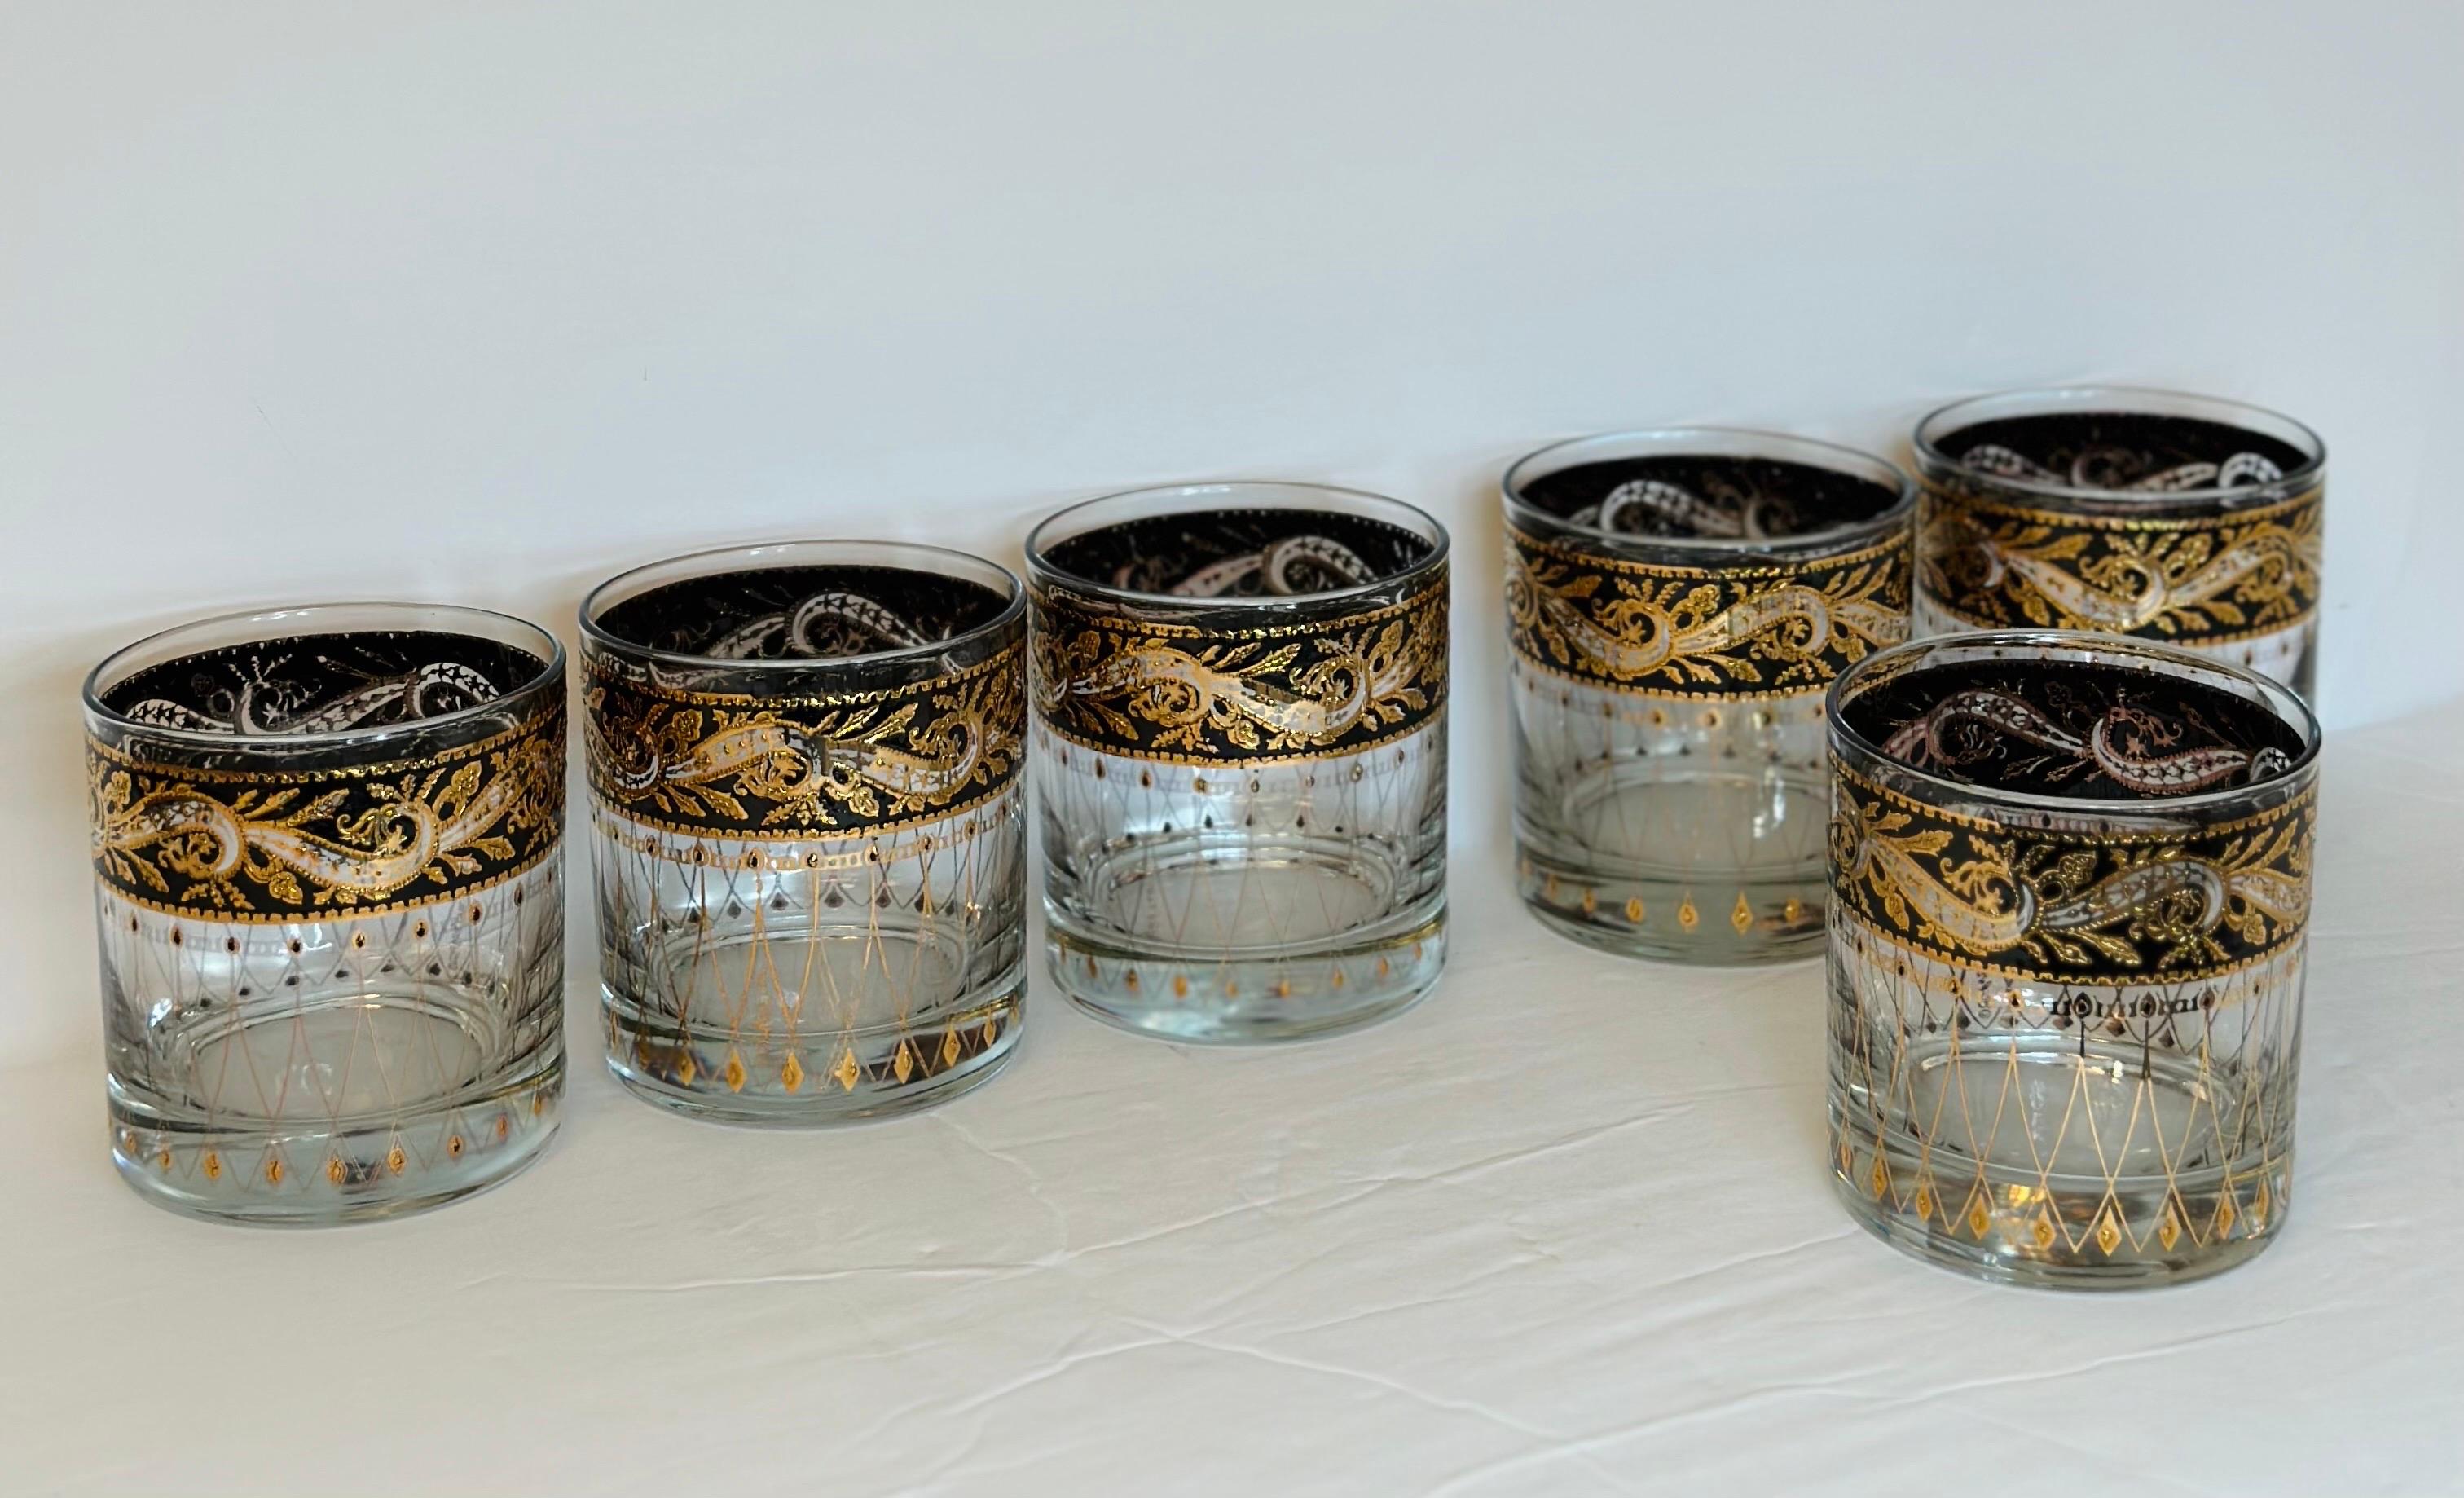 We are very pleased to offer an exquisite set of six glasses, by Culver, circa the 1960s.  This set epitomizes the quintessential Mid-century modern design era with a captivating leaf pattern, enriched by the presence of intricate gold and black